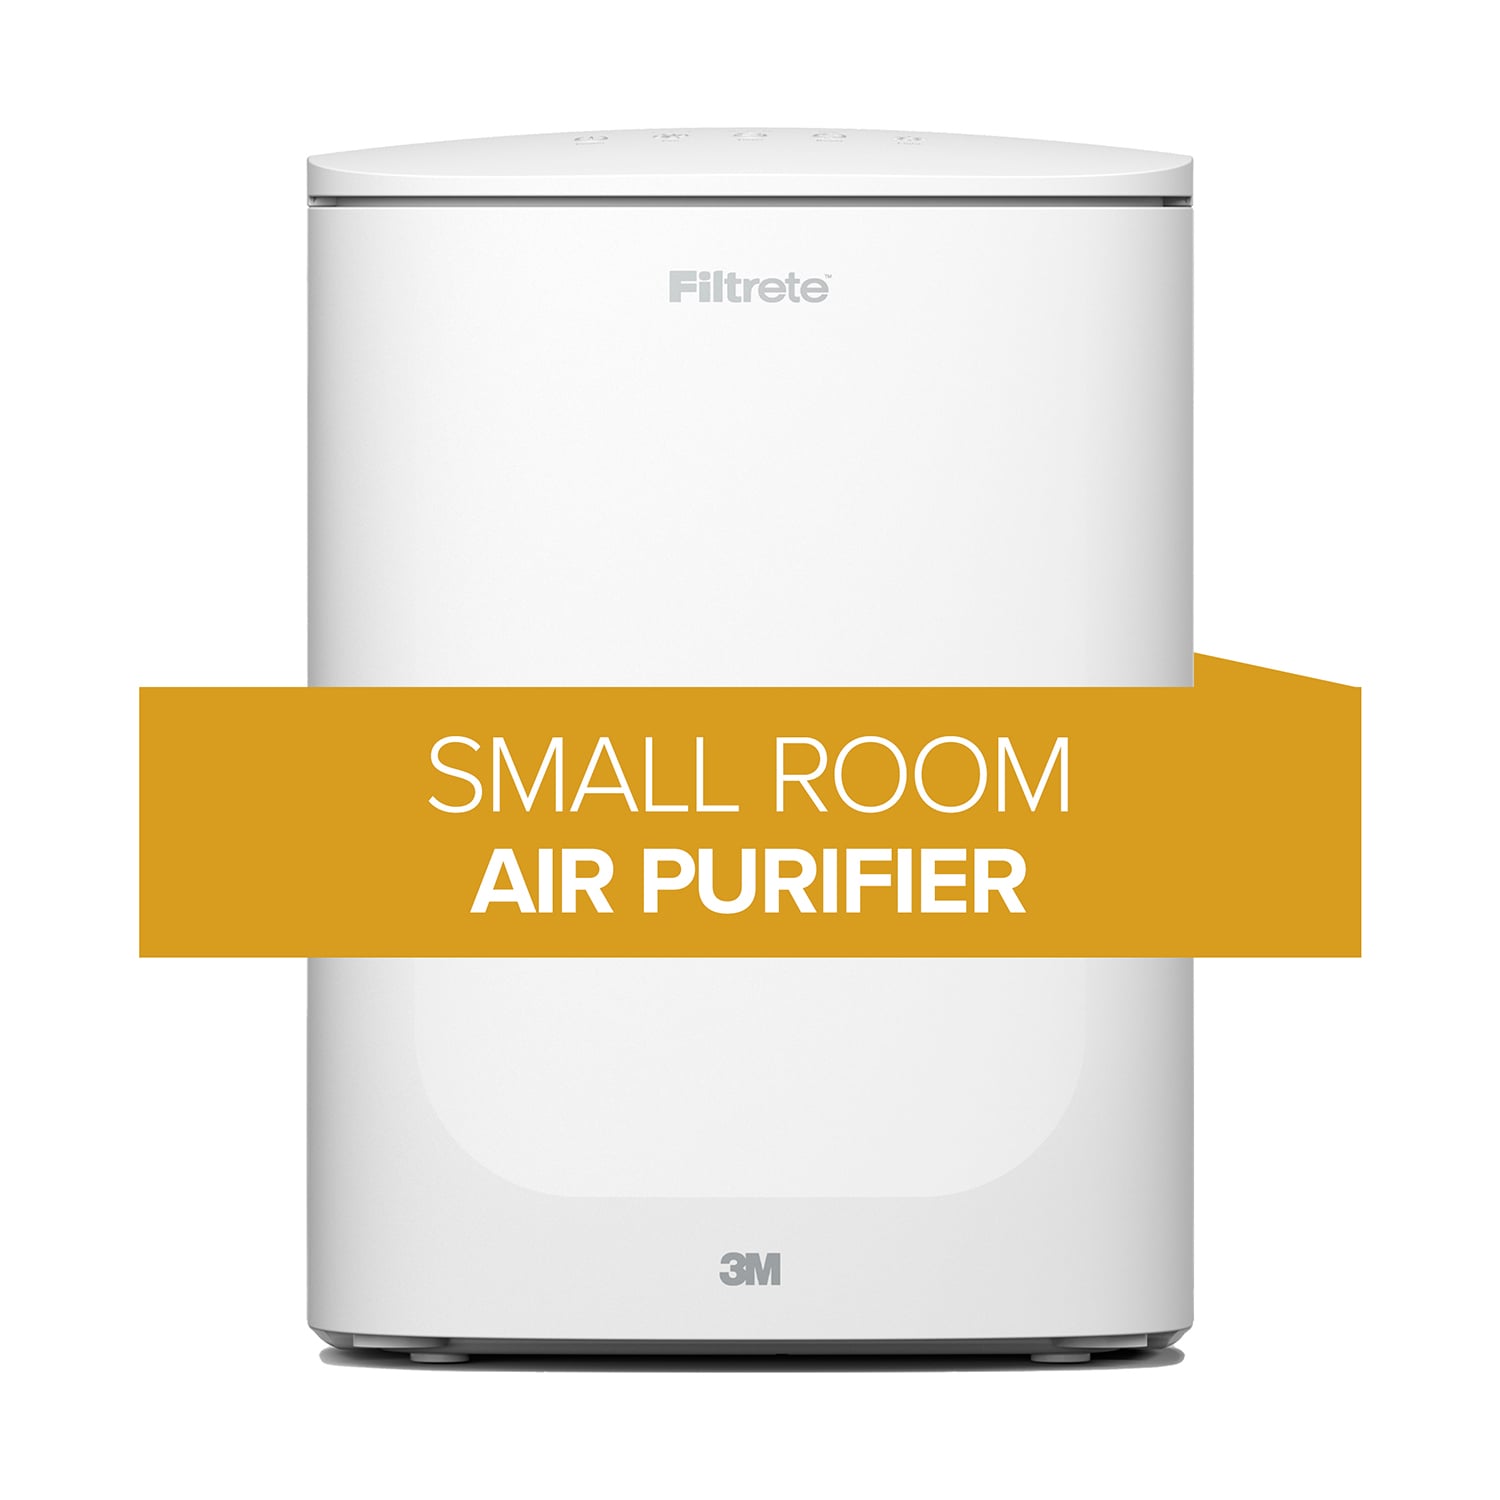  Galanz Pro Air Purifier, Smart WiFi, Auto Air Quality Monitor,  3-Stage H13 HEPA Filter for 875 sq ft Large Room, 99.99% of Particles, Pet  Allergies, Mold, Smoke, White: Home & Kitchen